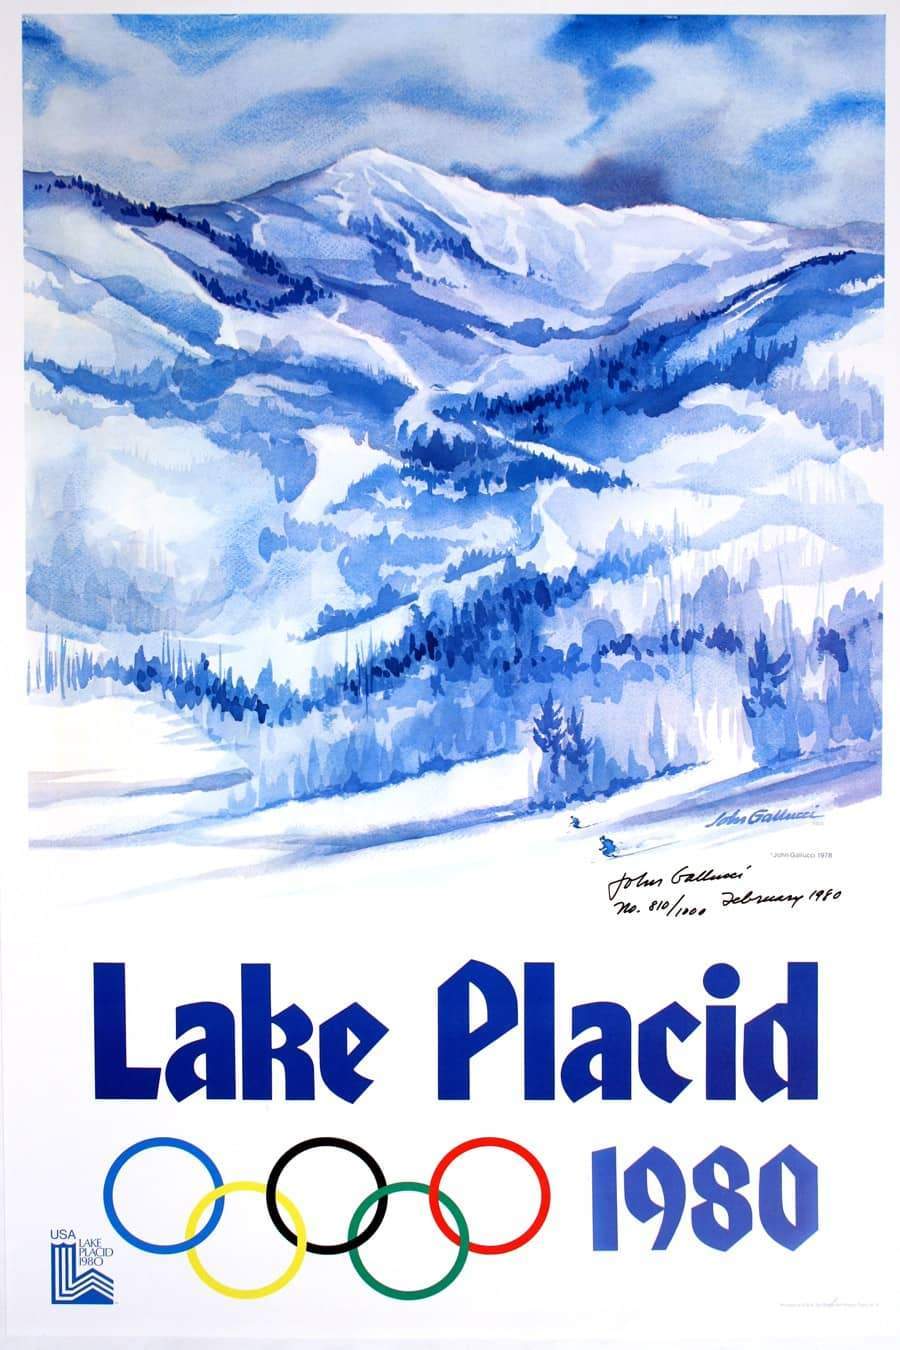 Lake Placid Winter Olympics 1980 Official Original Vintage Poster by John Gallucci Hand Signed and Numbered